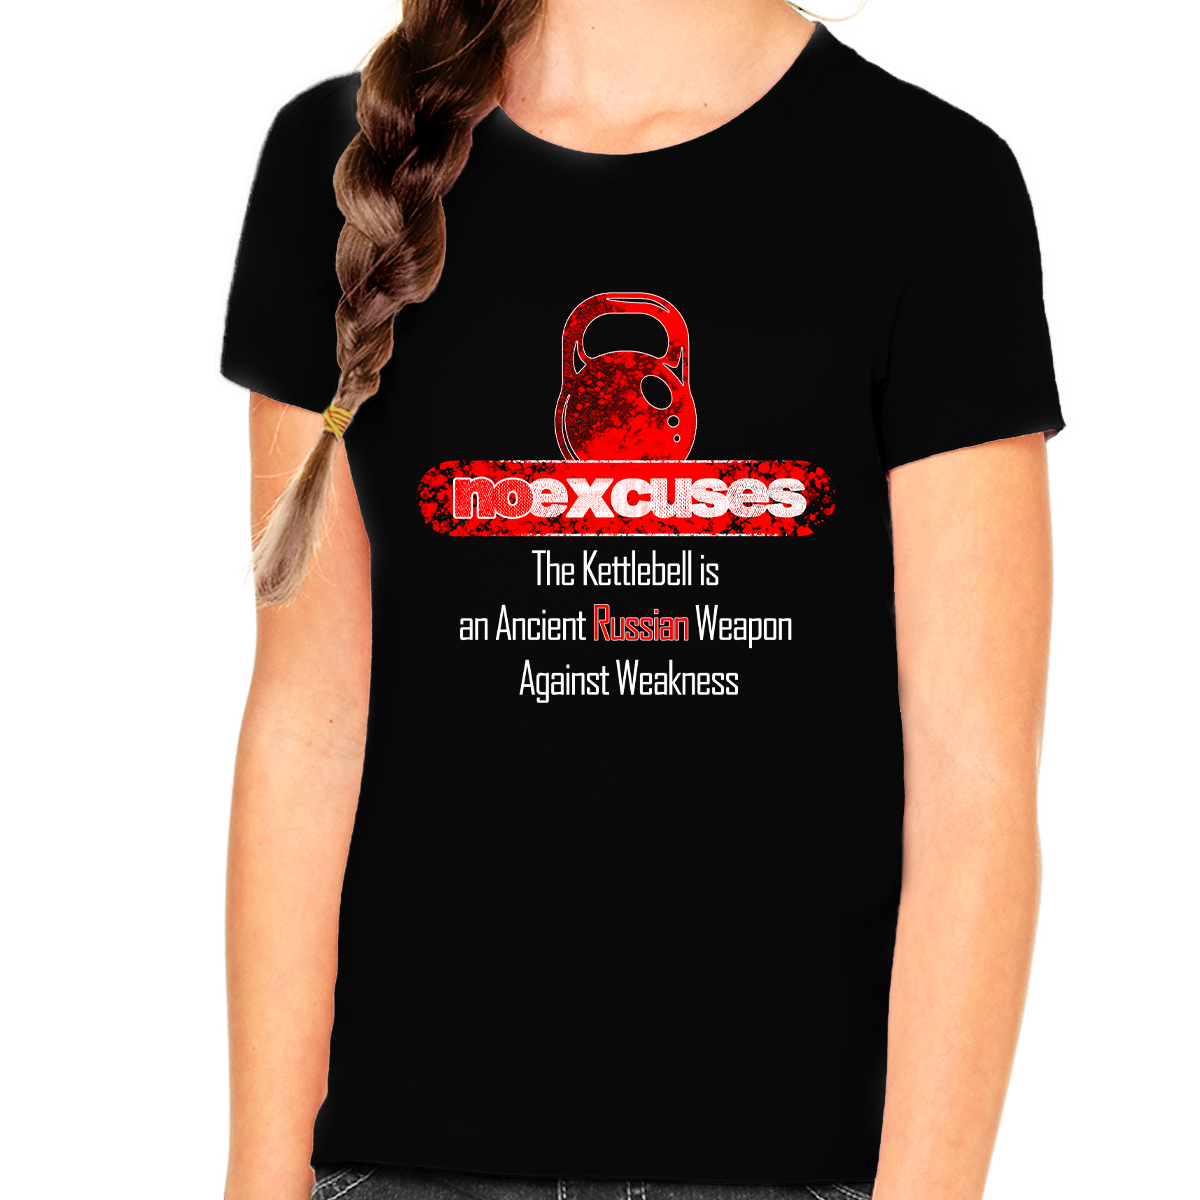 No Excuses Gym Work Out Shirts for KIDS - Graphic Tees for GIRLS YOUTH - Vintage Shirts for GIRLS